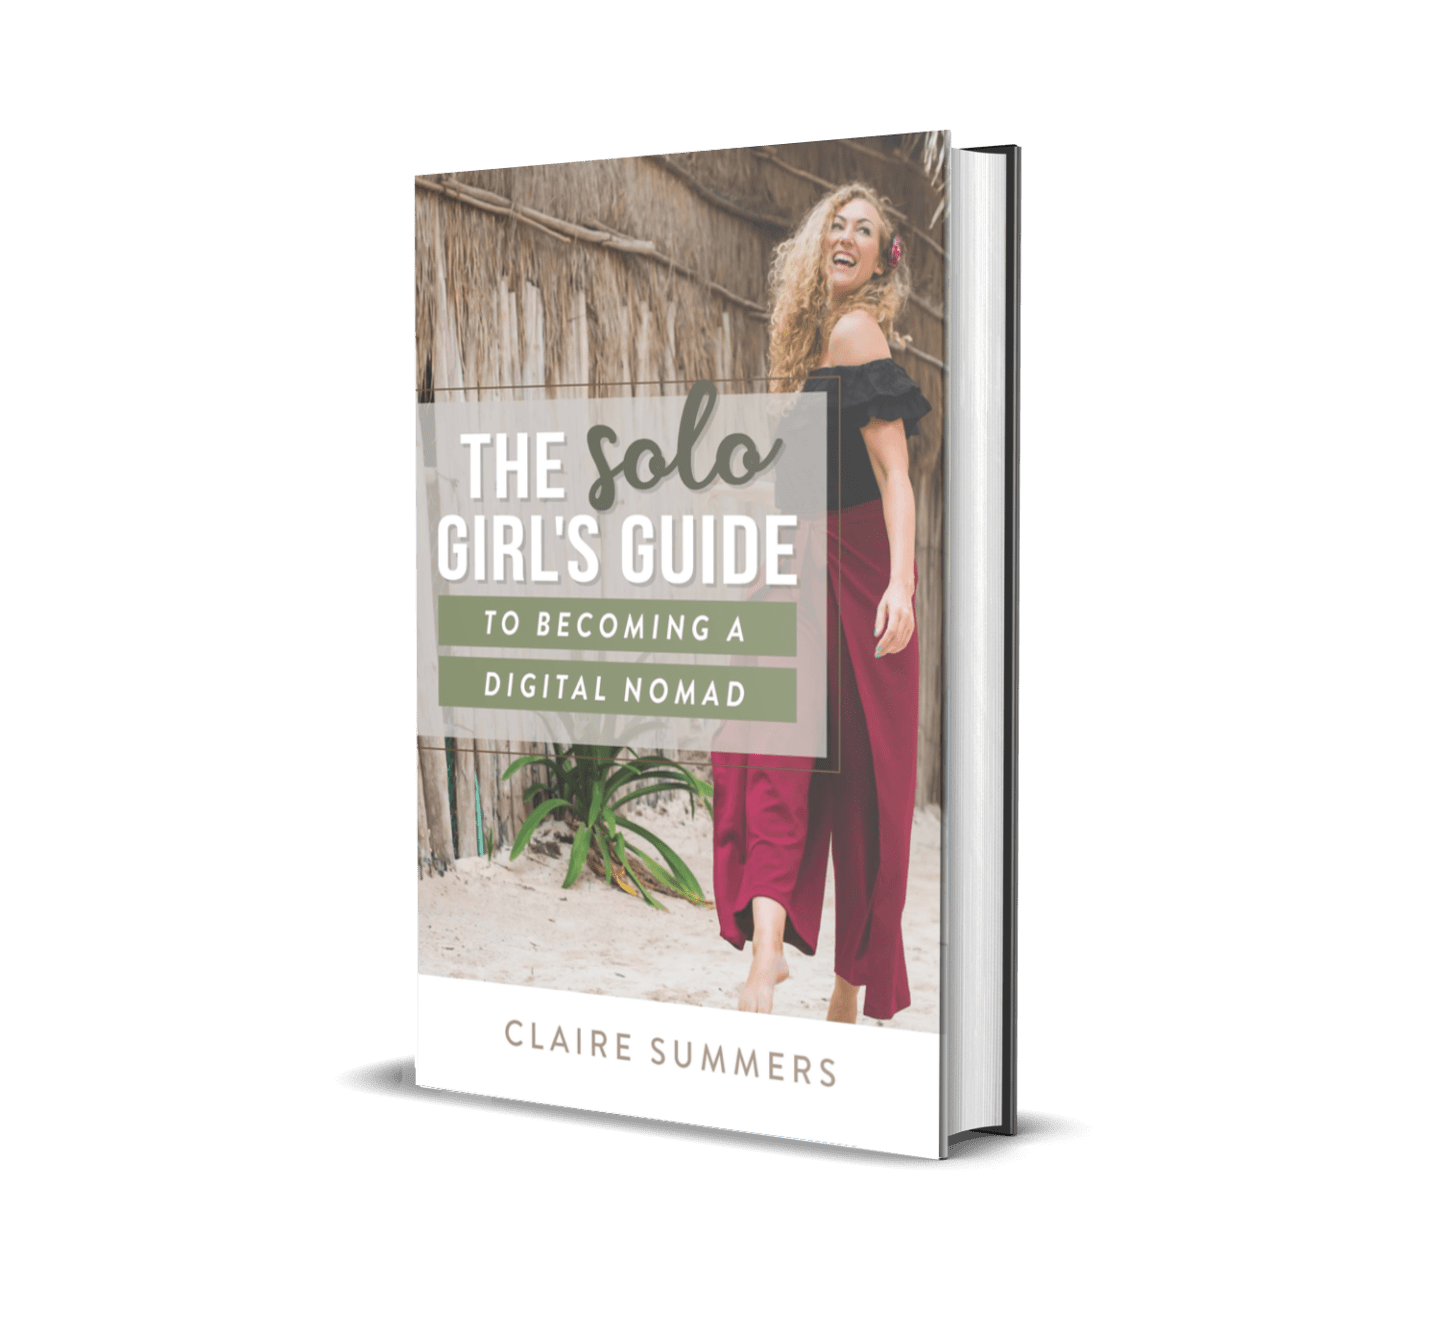 The solo girls guide to becoming a digital nomad